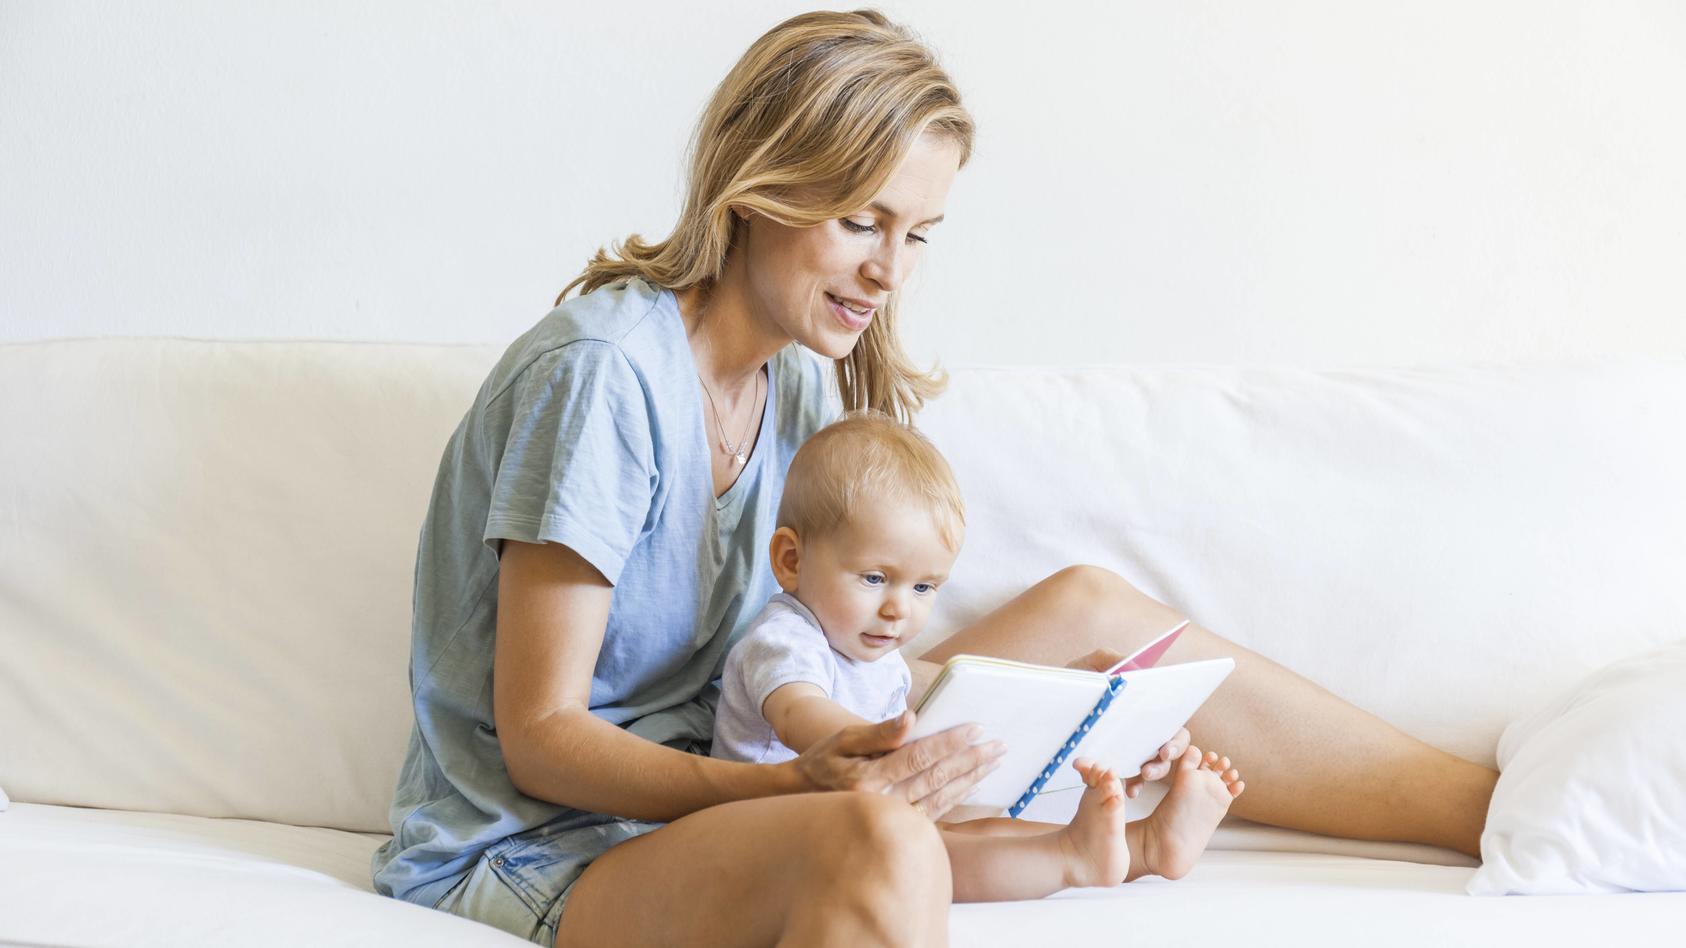 Mother and baby girl sitting on couch looking at picture book model released Symbolfoto property released PUBLICATIONxINxGERxSUIxAUTxHUNxONLY TCF05872  